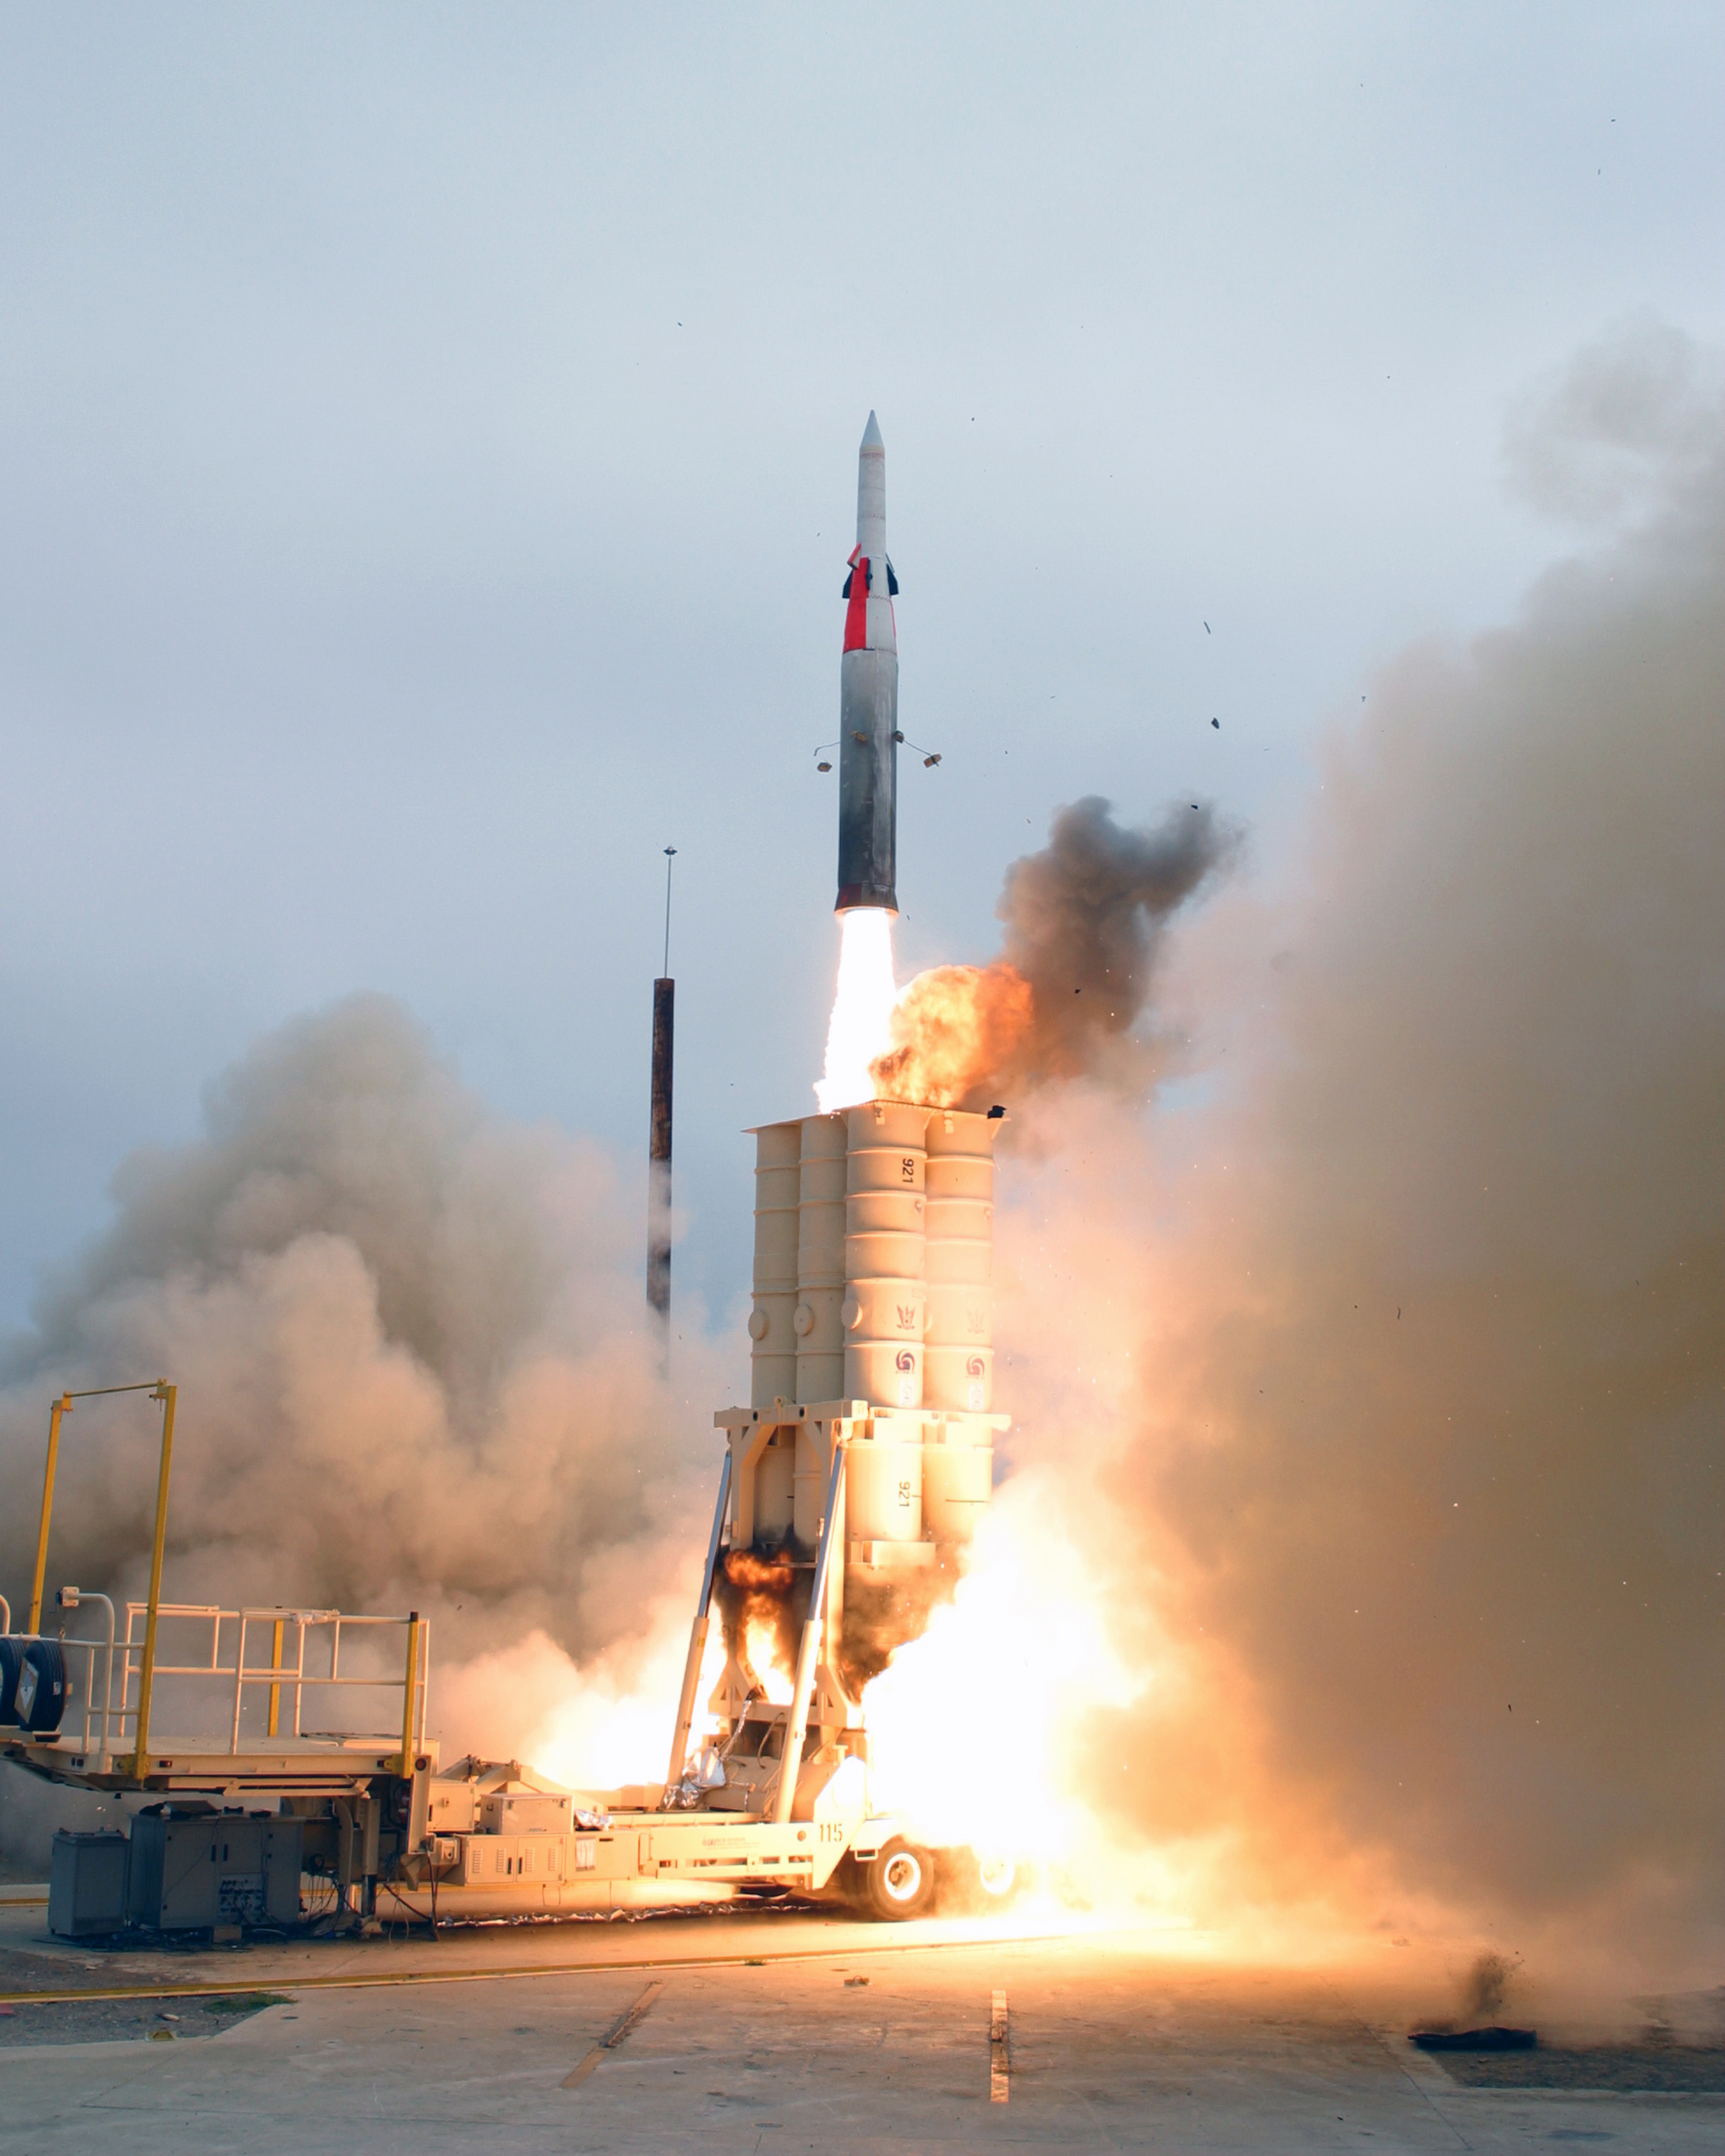 An Arrow-2 anti-ballistic missile launches to intercept an incoming target missile as part of a joint test program between the United States and Israel, the Point Mugu Sea Range, California, July 29, 2004.